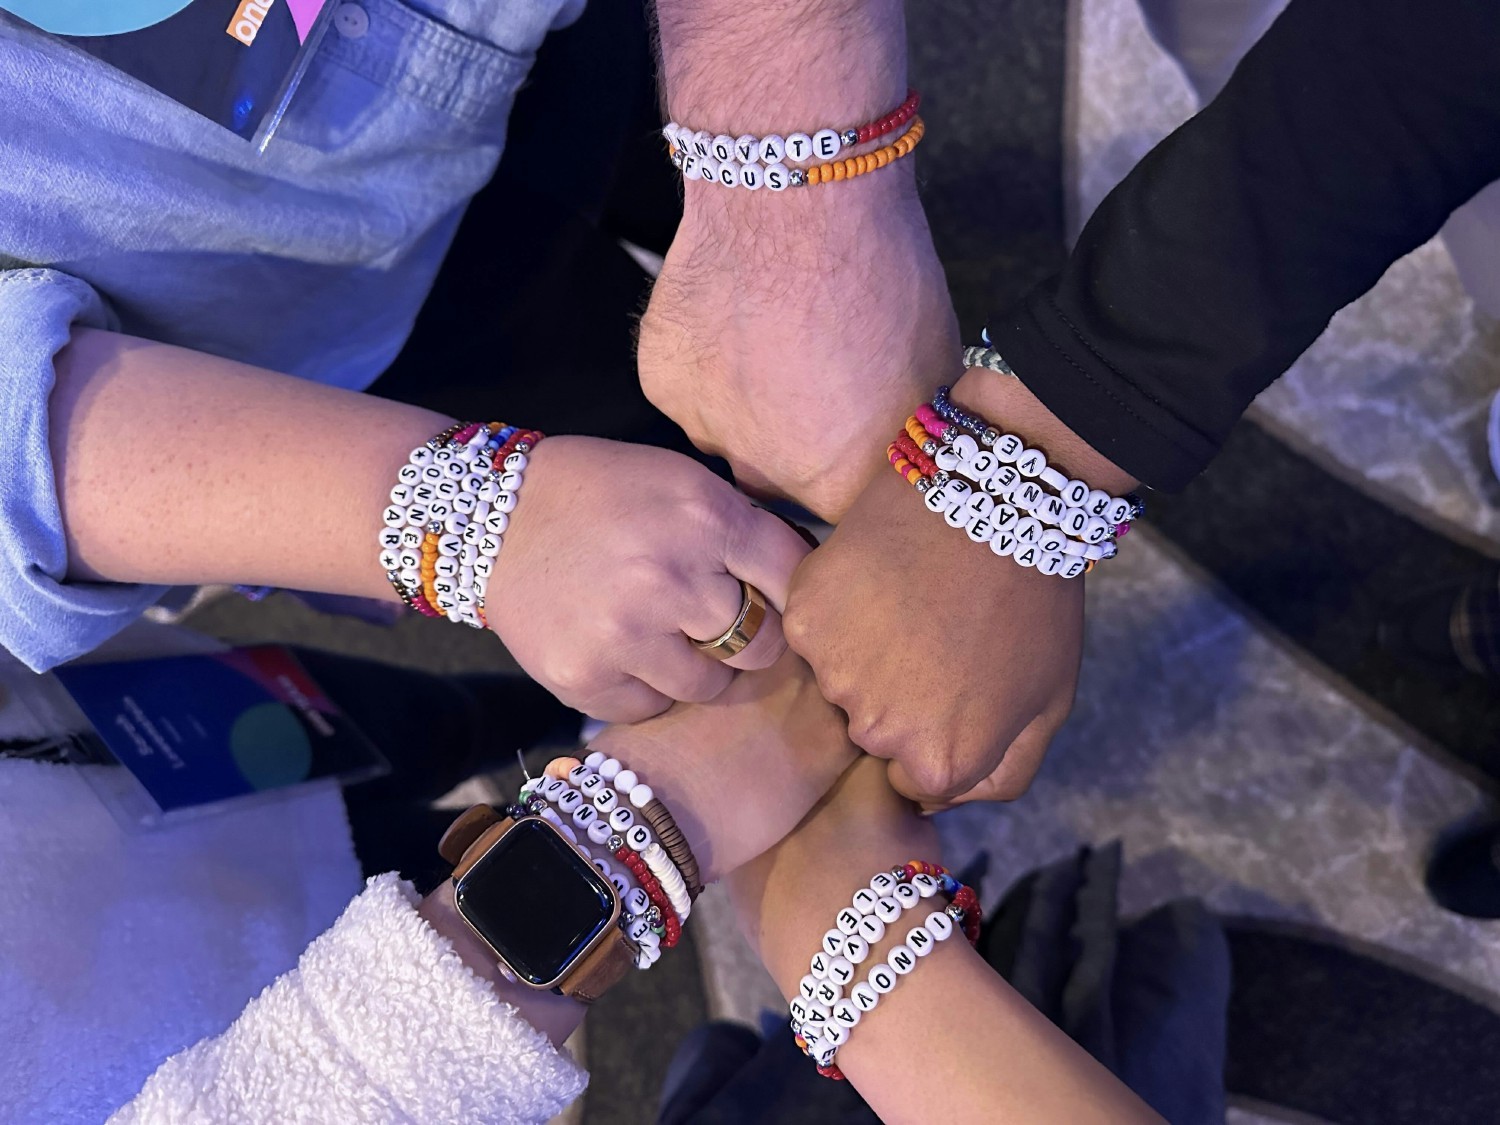 Team members sporting bracelets that were given and traded at our in-person All Hands 